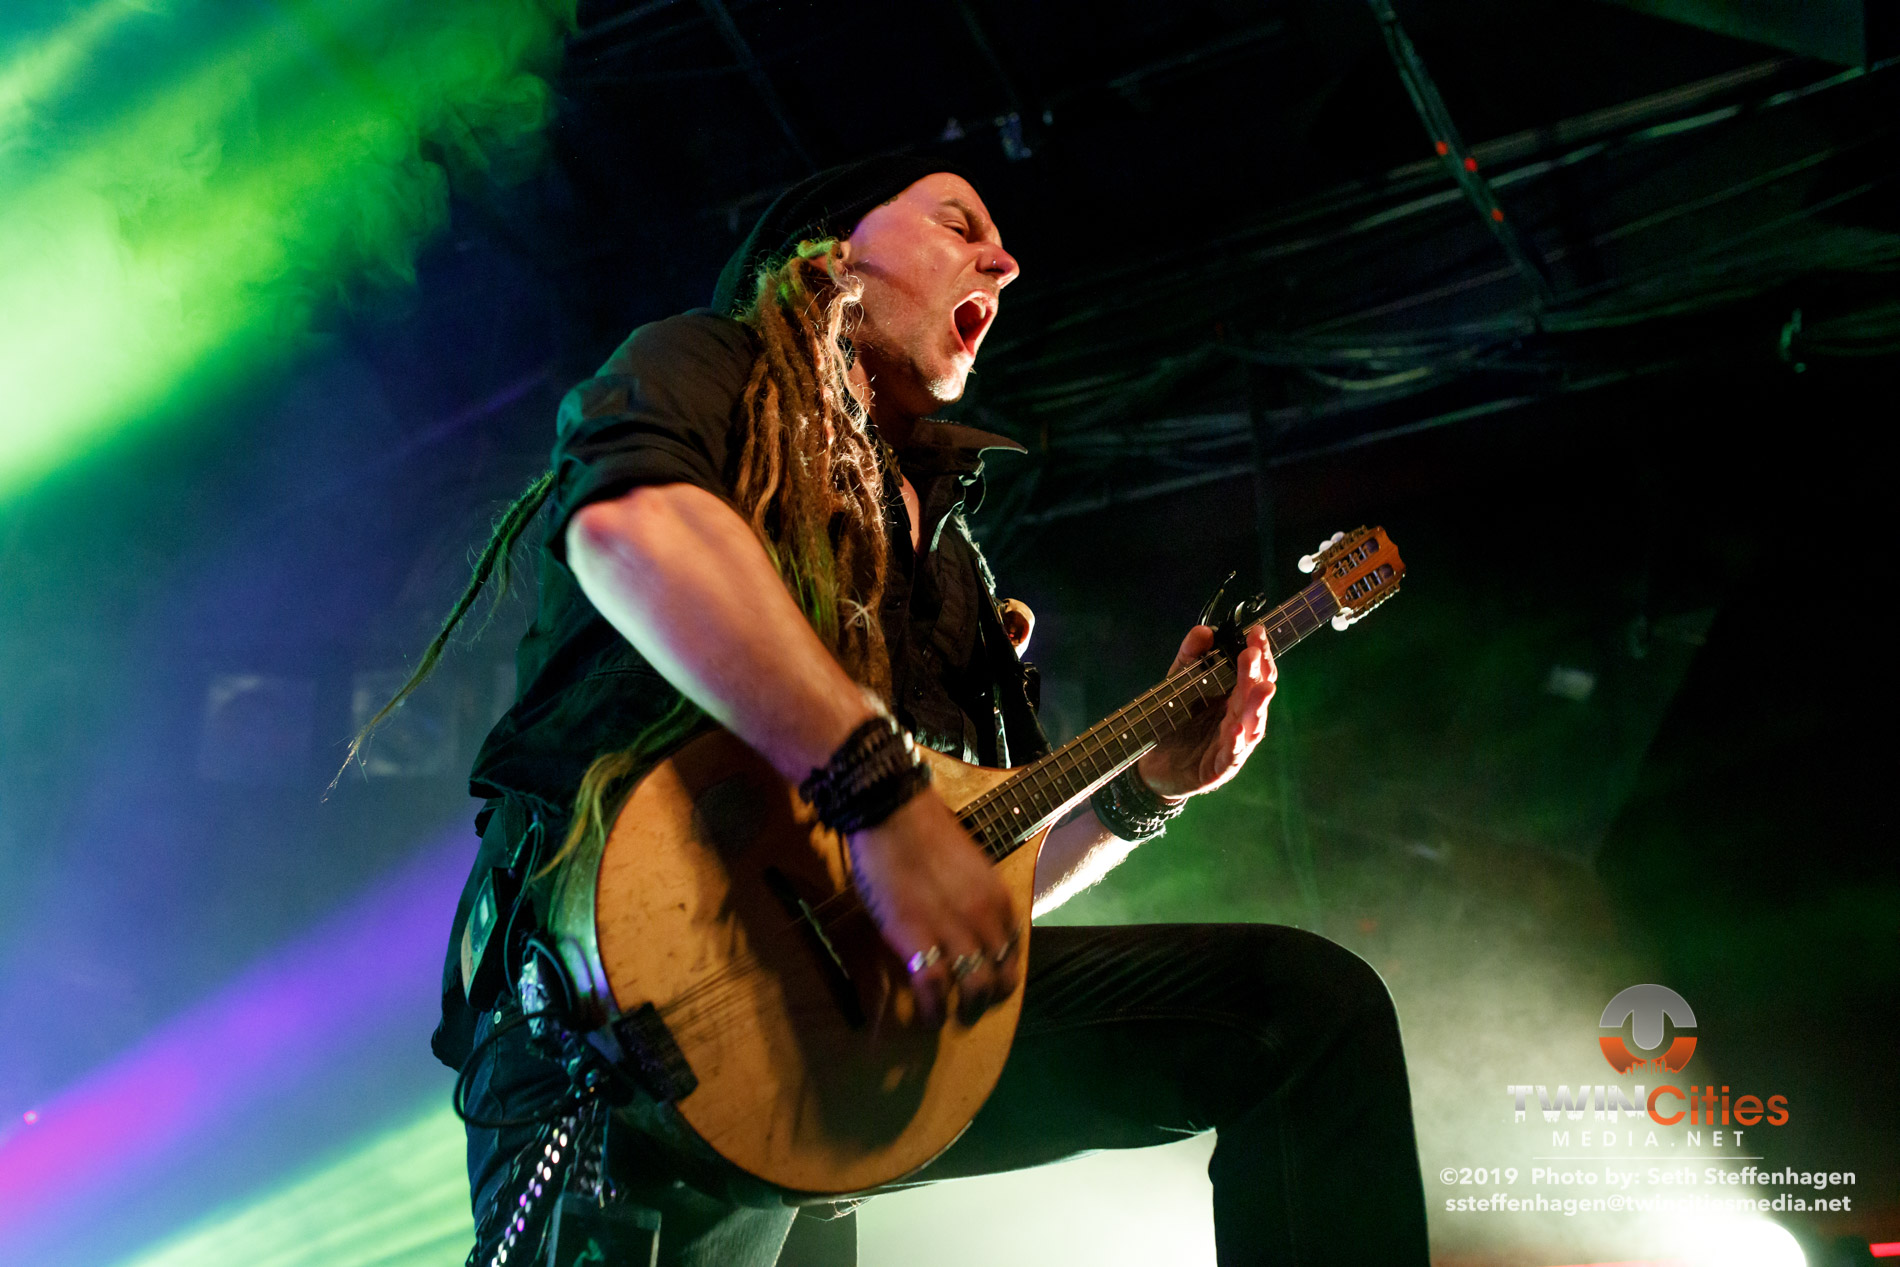 October 5, 2019 - Minneapolis, Minnesota, United States -  Eluveitie live in concert at The Cabooze co-headlining with Korpiklaani and with Gone In April as the openers.(Photo by Seth Steffenhagen/Steffenhagen Photography)